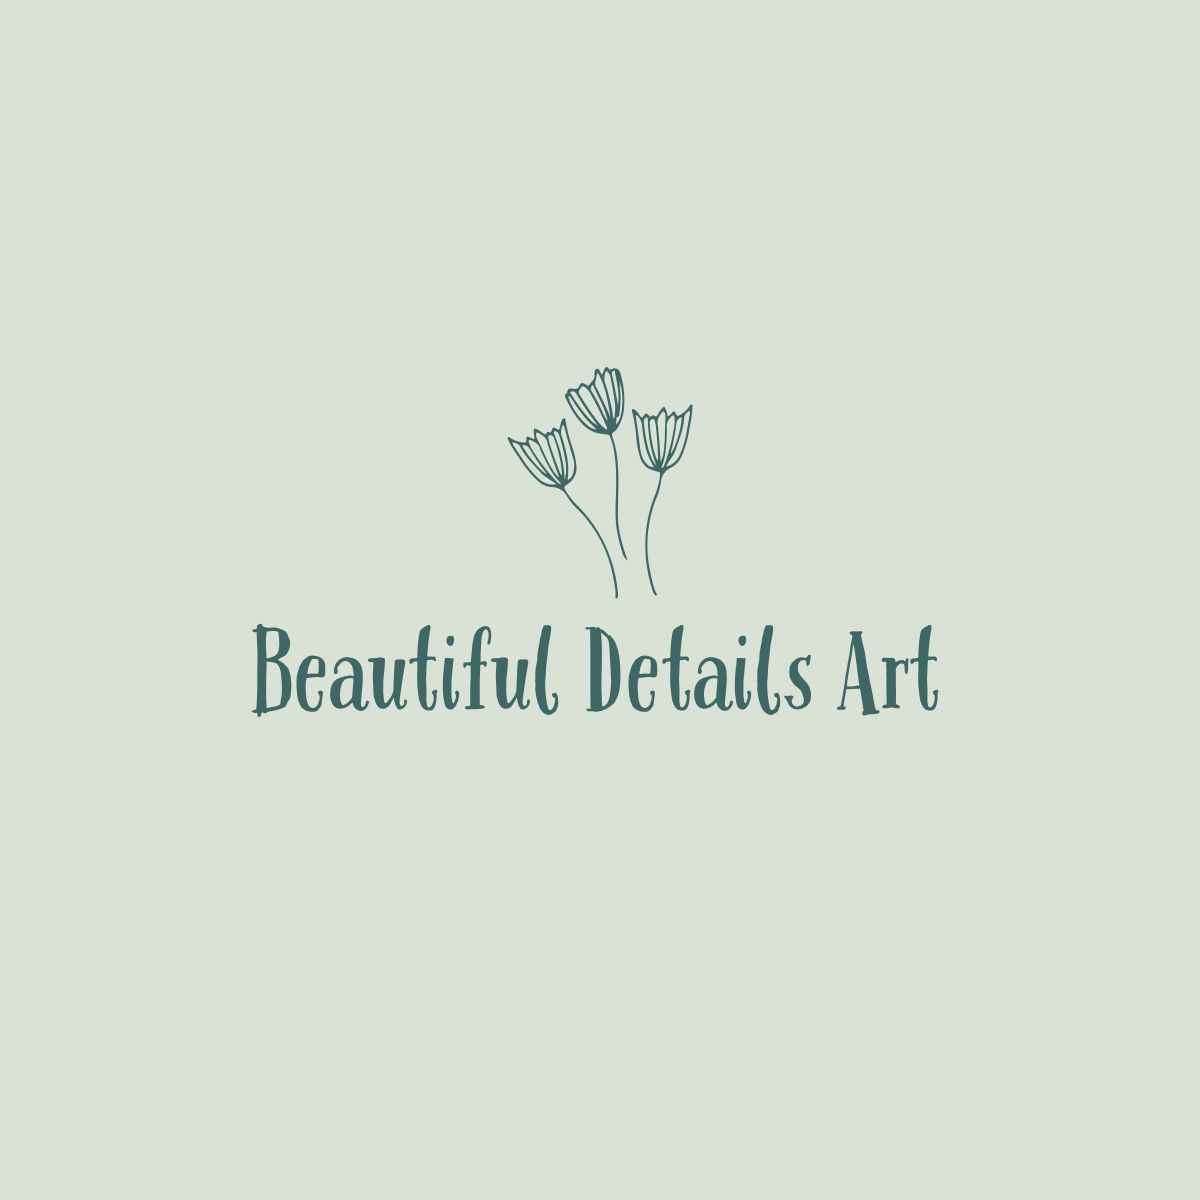 This shop is called BeautifulDetailsArt 